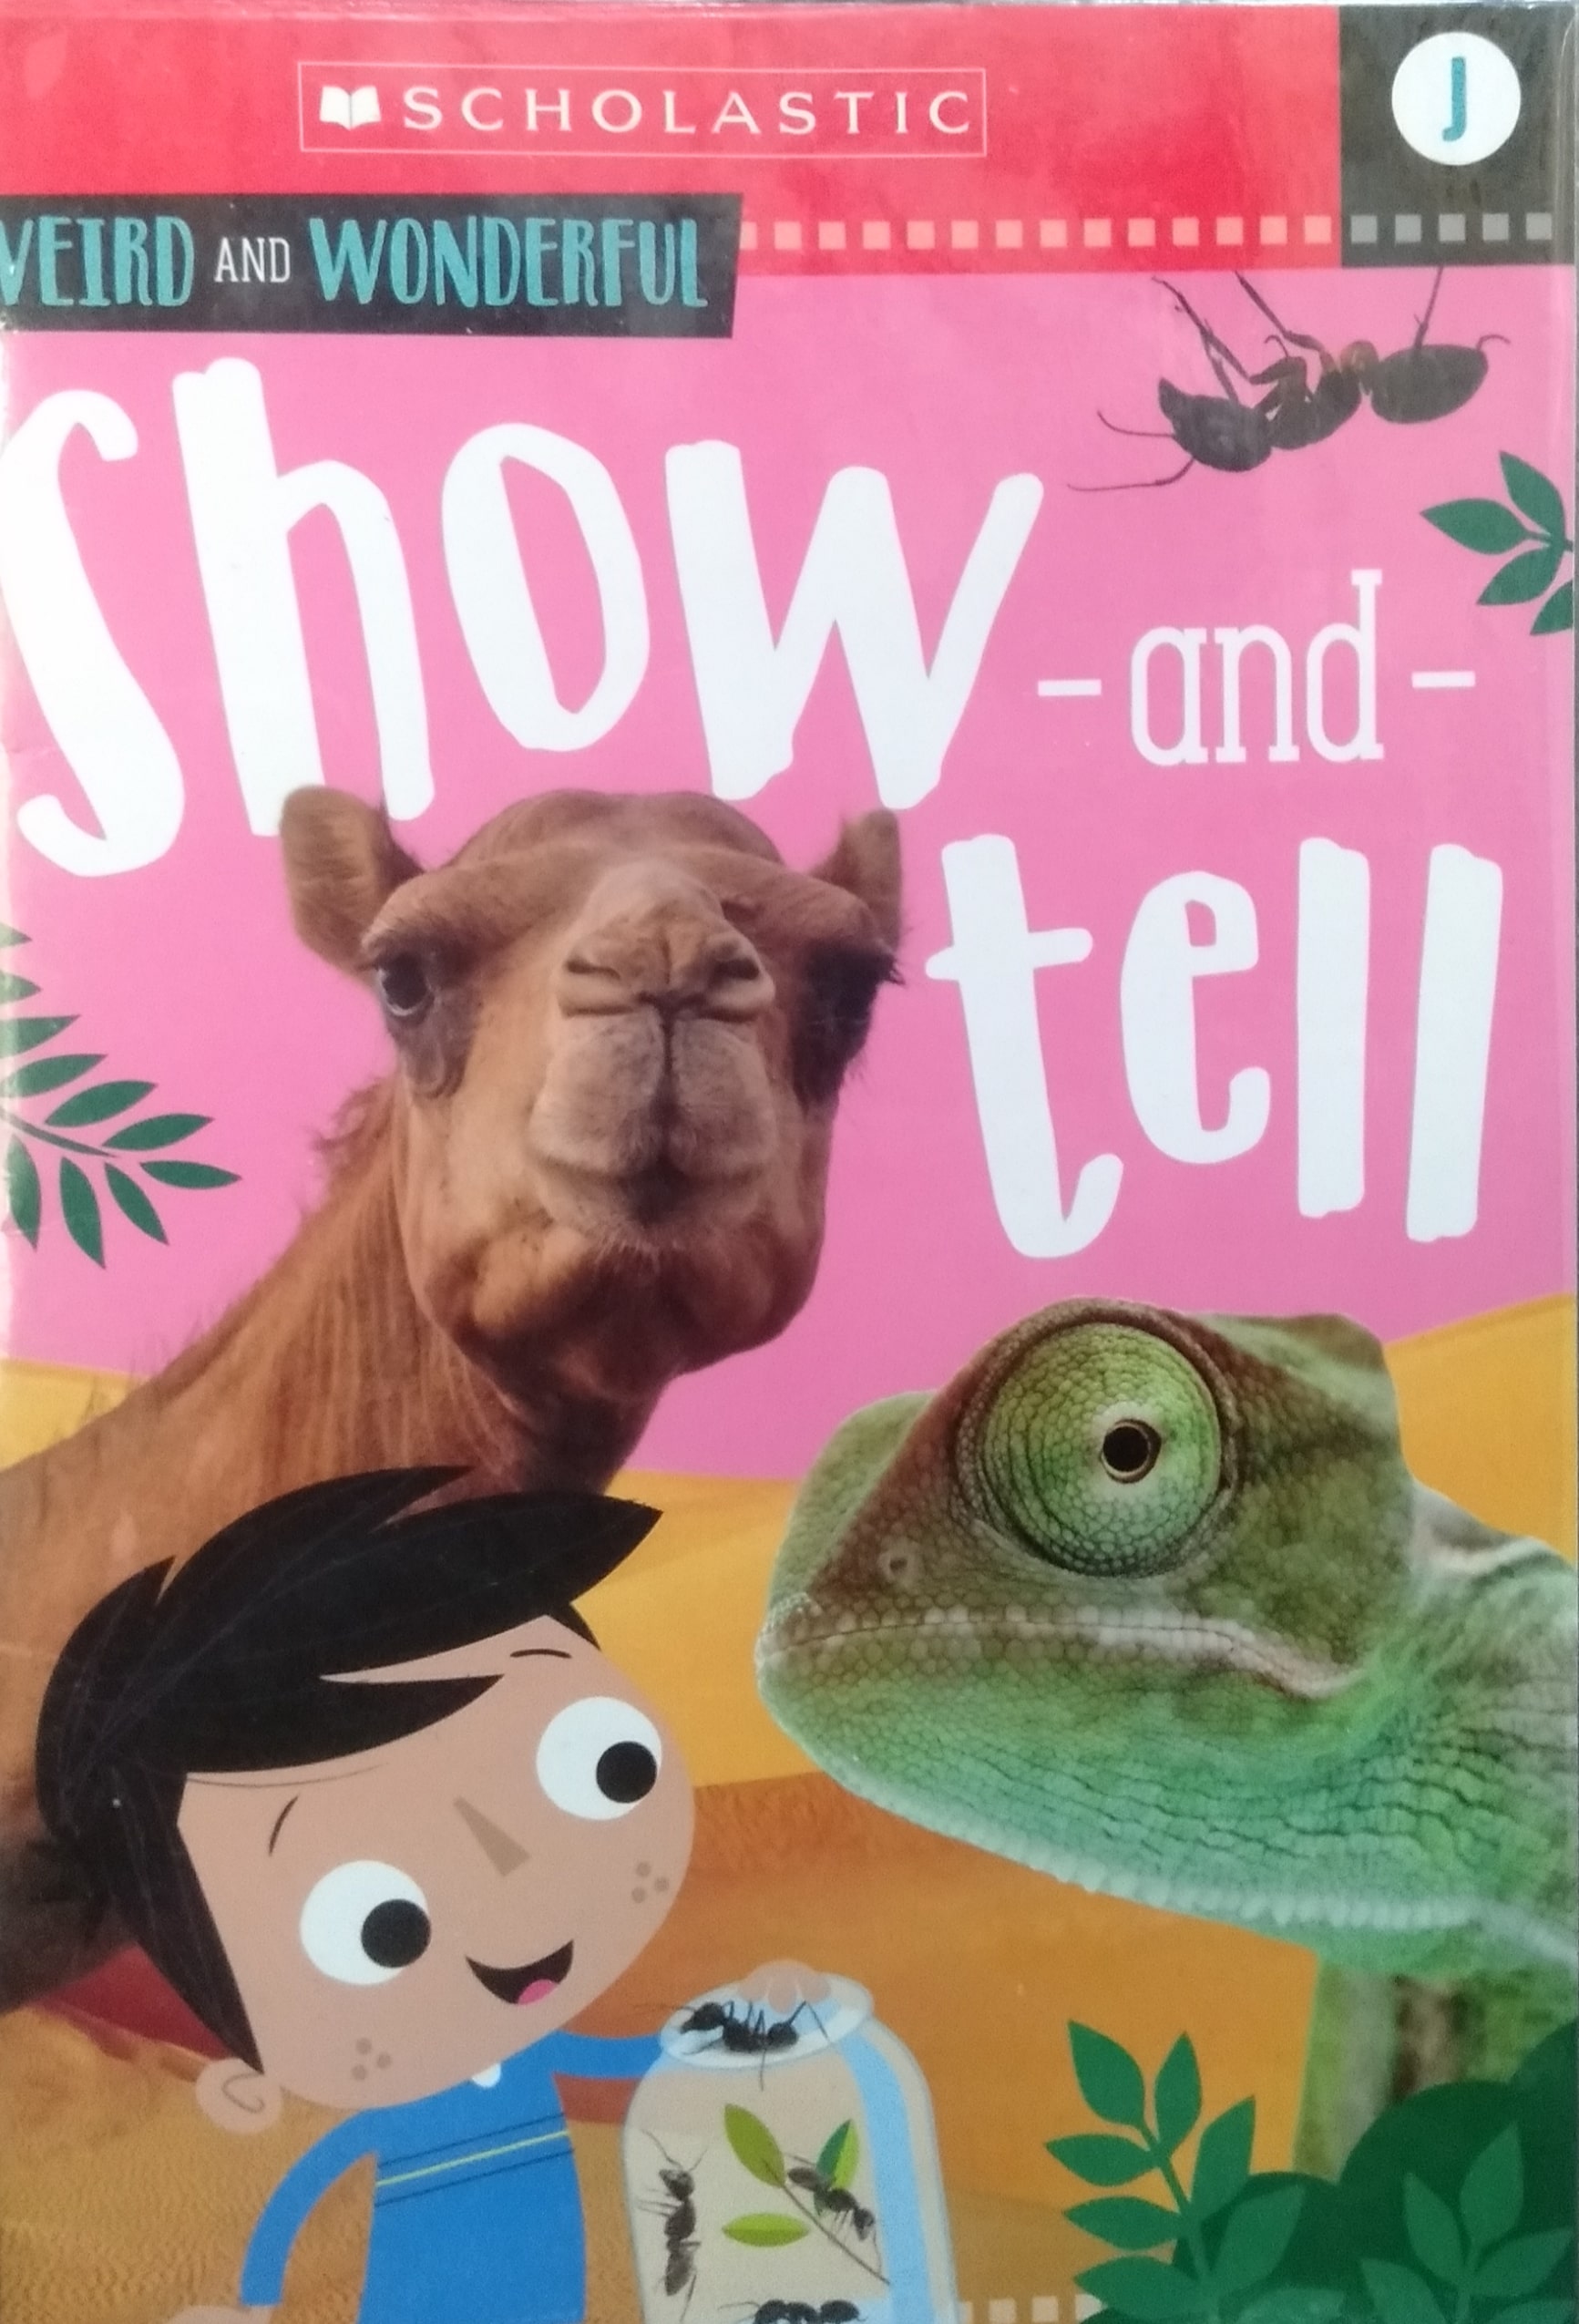 IMG : Animal Antics Weird and Wonderful Show and tell